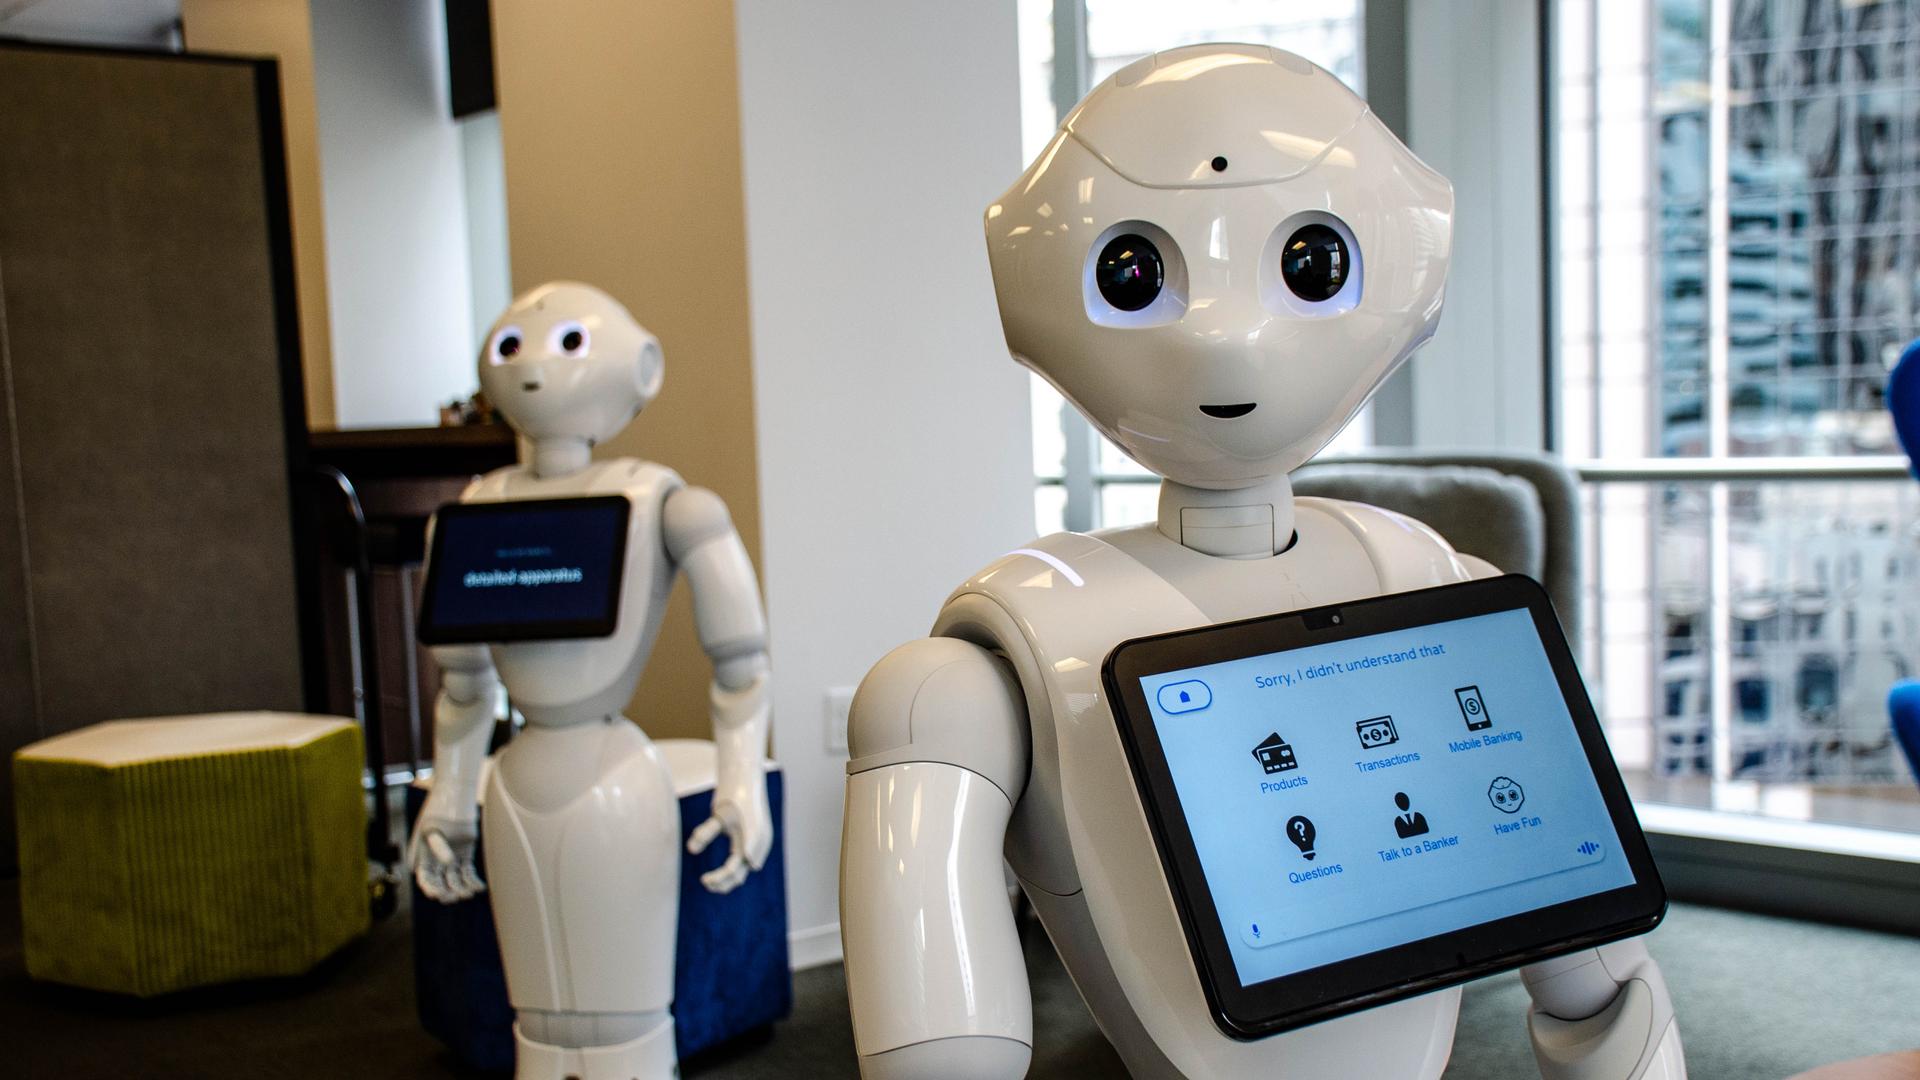 About 15,000 robots named “Pepper” are used in Japanese and European banks, fast service restaurants, and healthcare settings. Pepper is now in US bank branches too — HSBC has them in select locations to help answer basic customer questions.